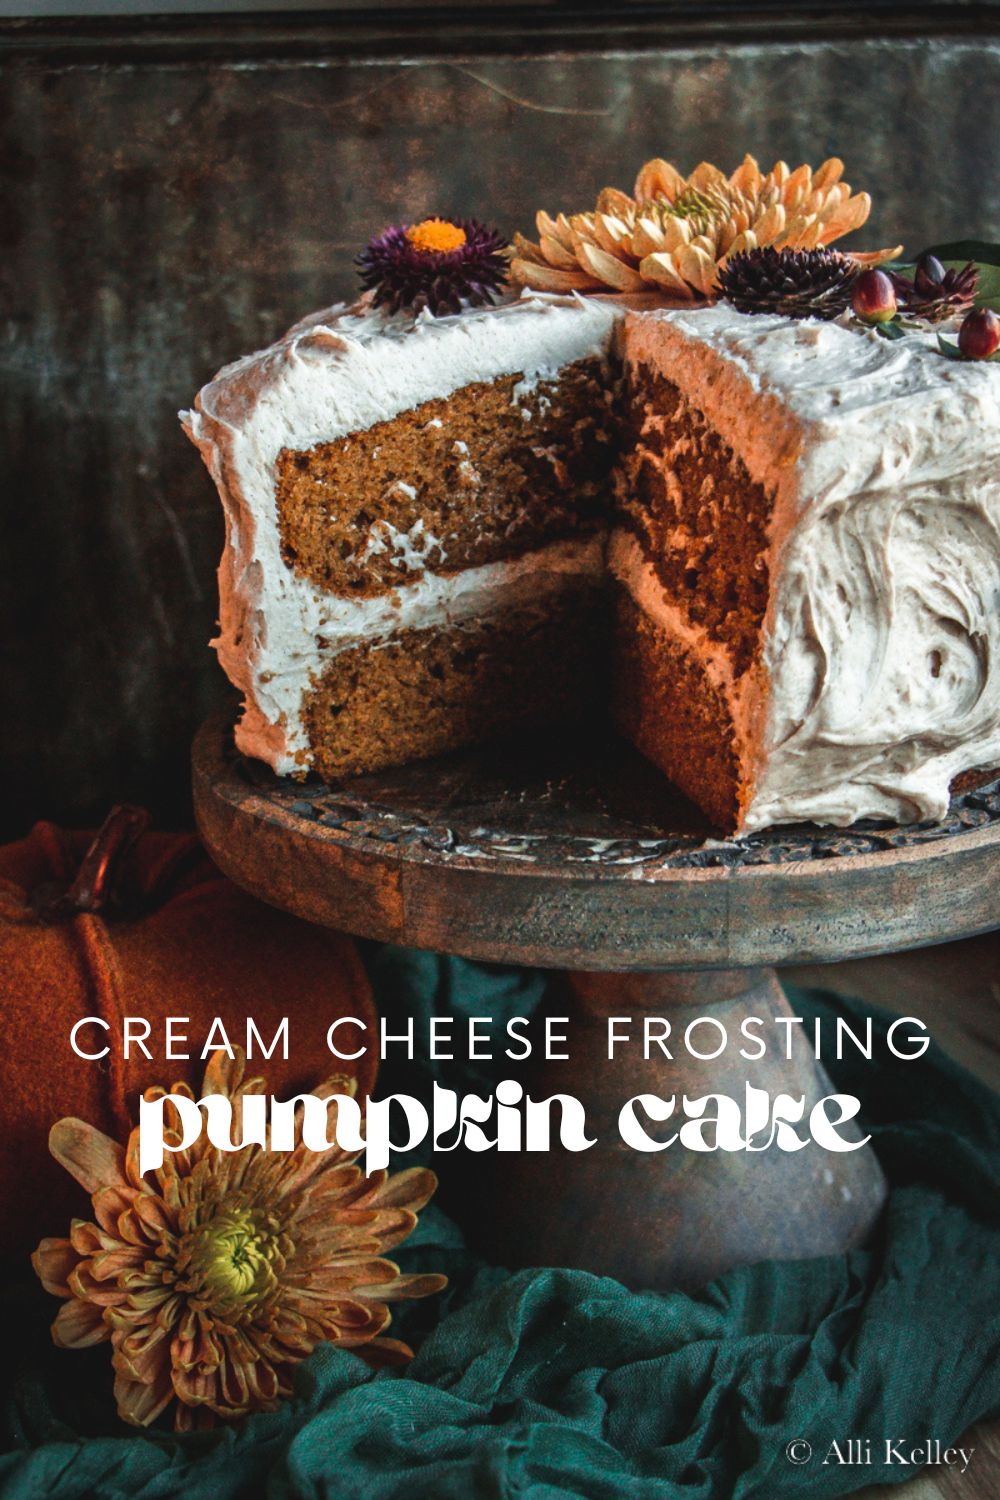 This layered pumpkin spice cake is not only a show-stopper, it is super easy to make! Moist, delicious and bursting with pumpkin and pumpkin spice flavor! #pumpkin #pumpkinspice #pumpkinlayercake #pumpkincake #pumpkinrecipe #pumpkindessert #pumpkinrecipe #pumpkinseason #fallbaking #fallbakingrecipe #seasonalrecipe #thanksgivingrecipe